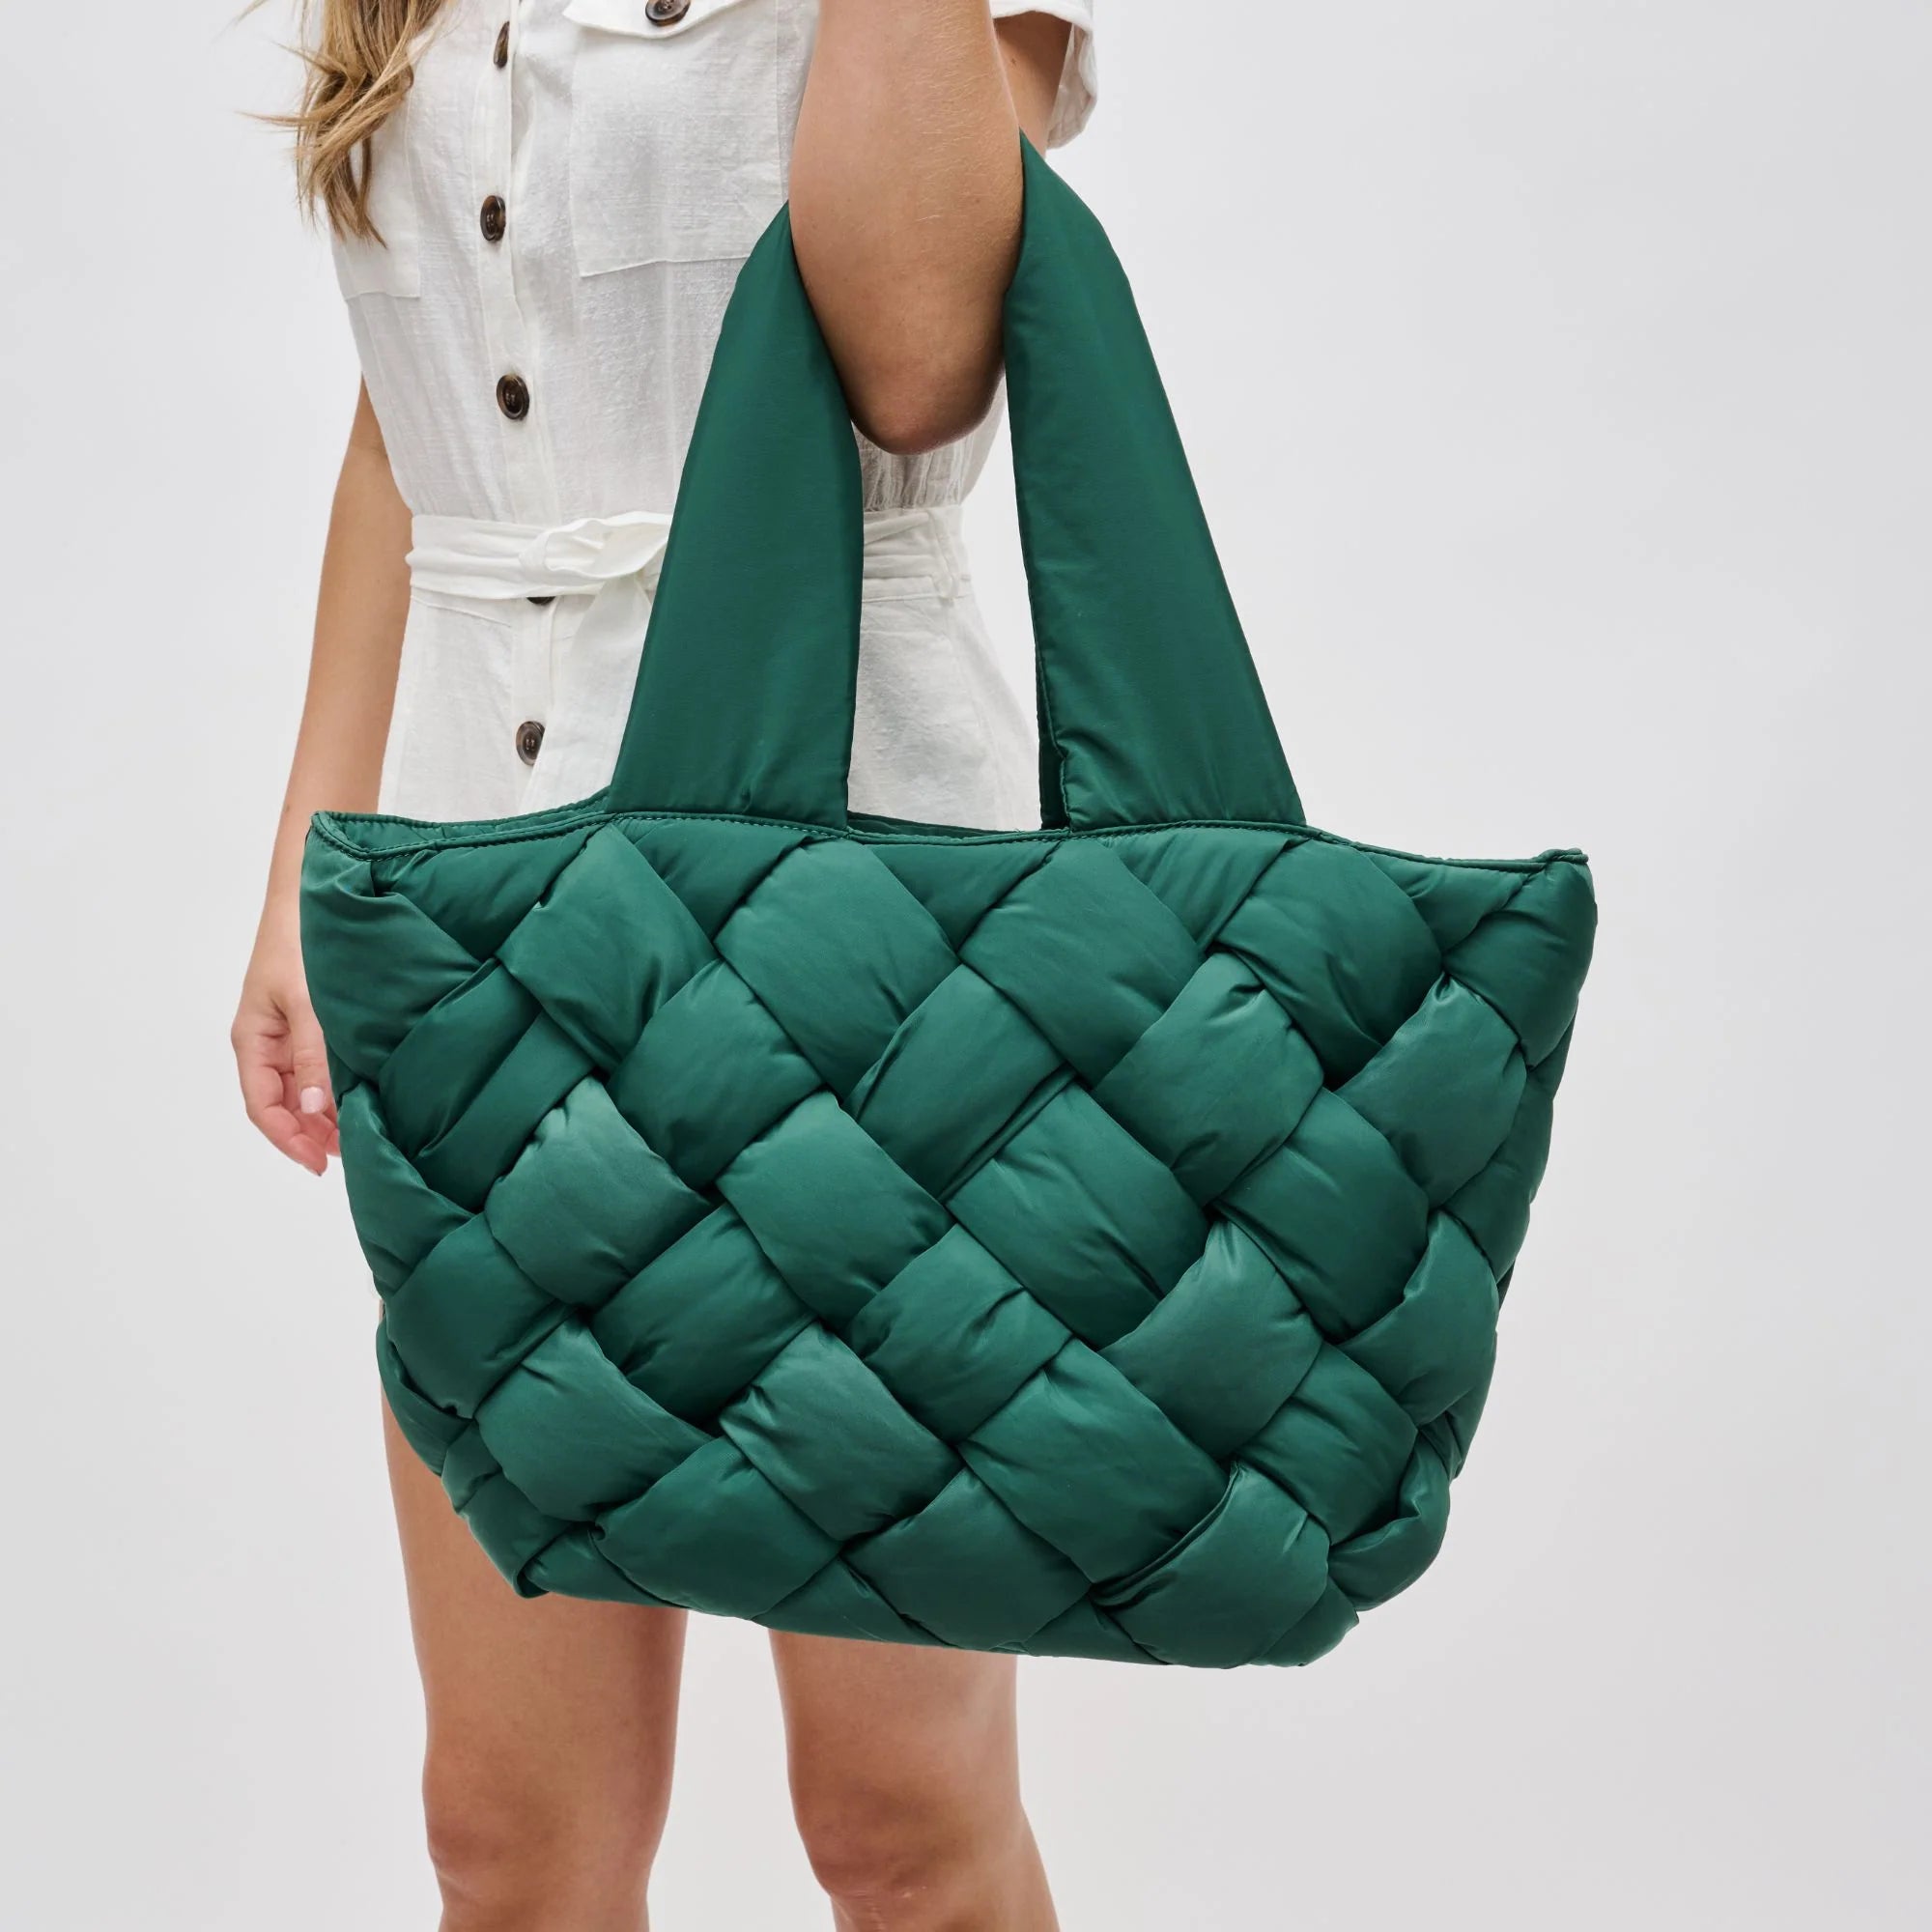 model carrying a green puffy woven tote